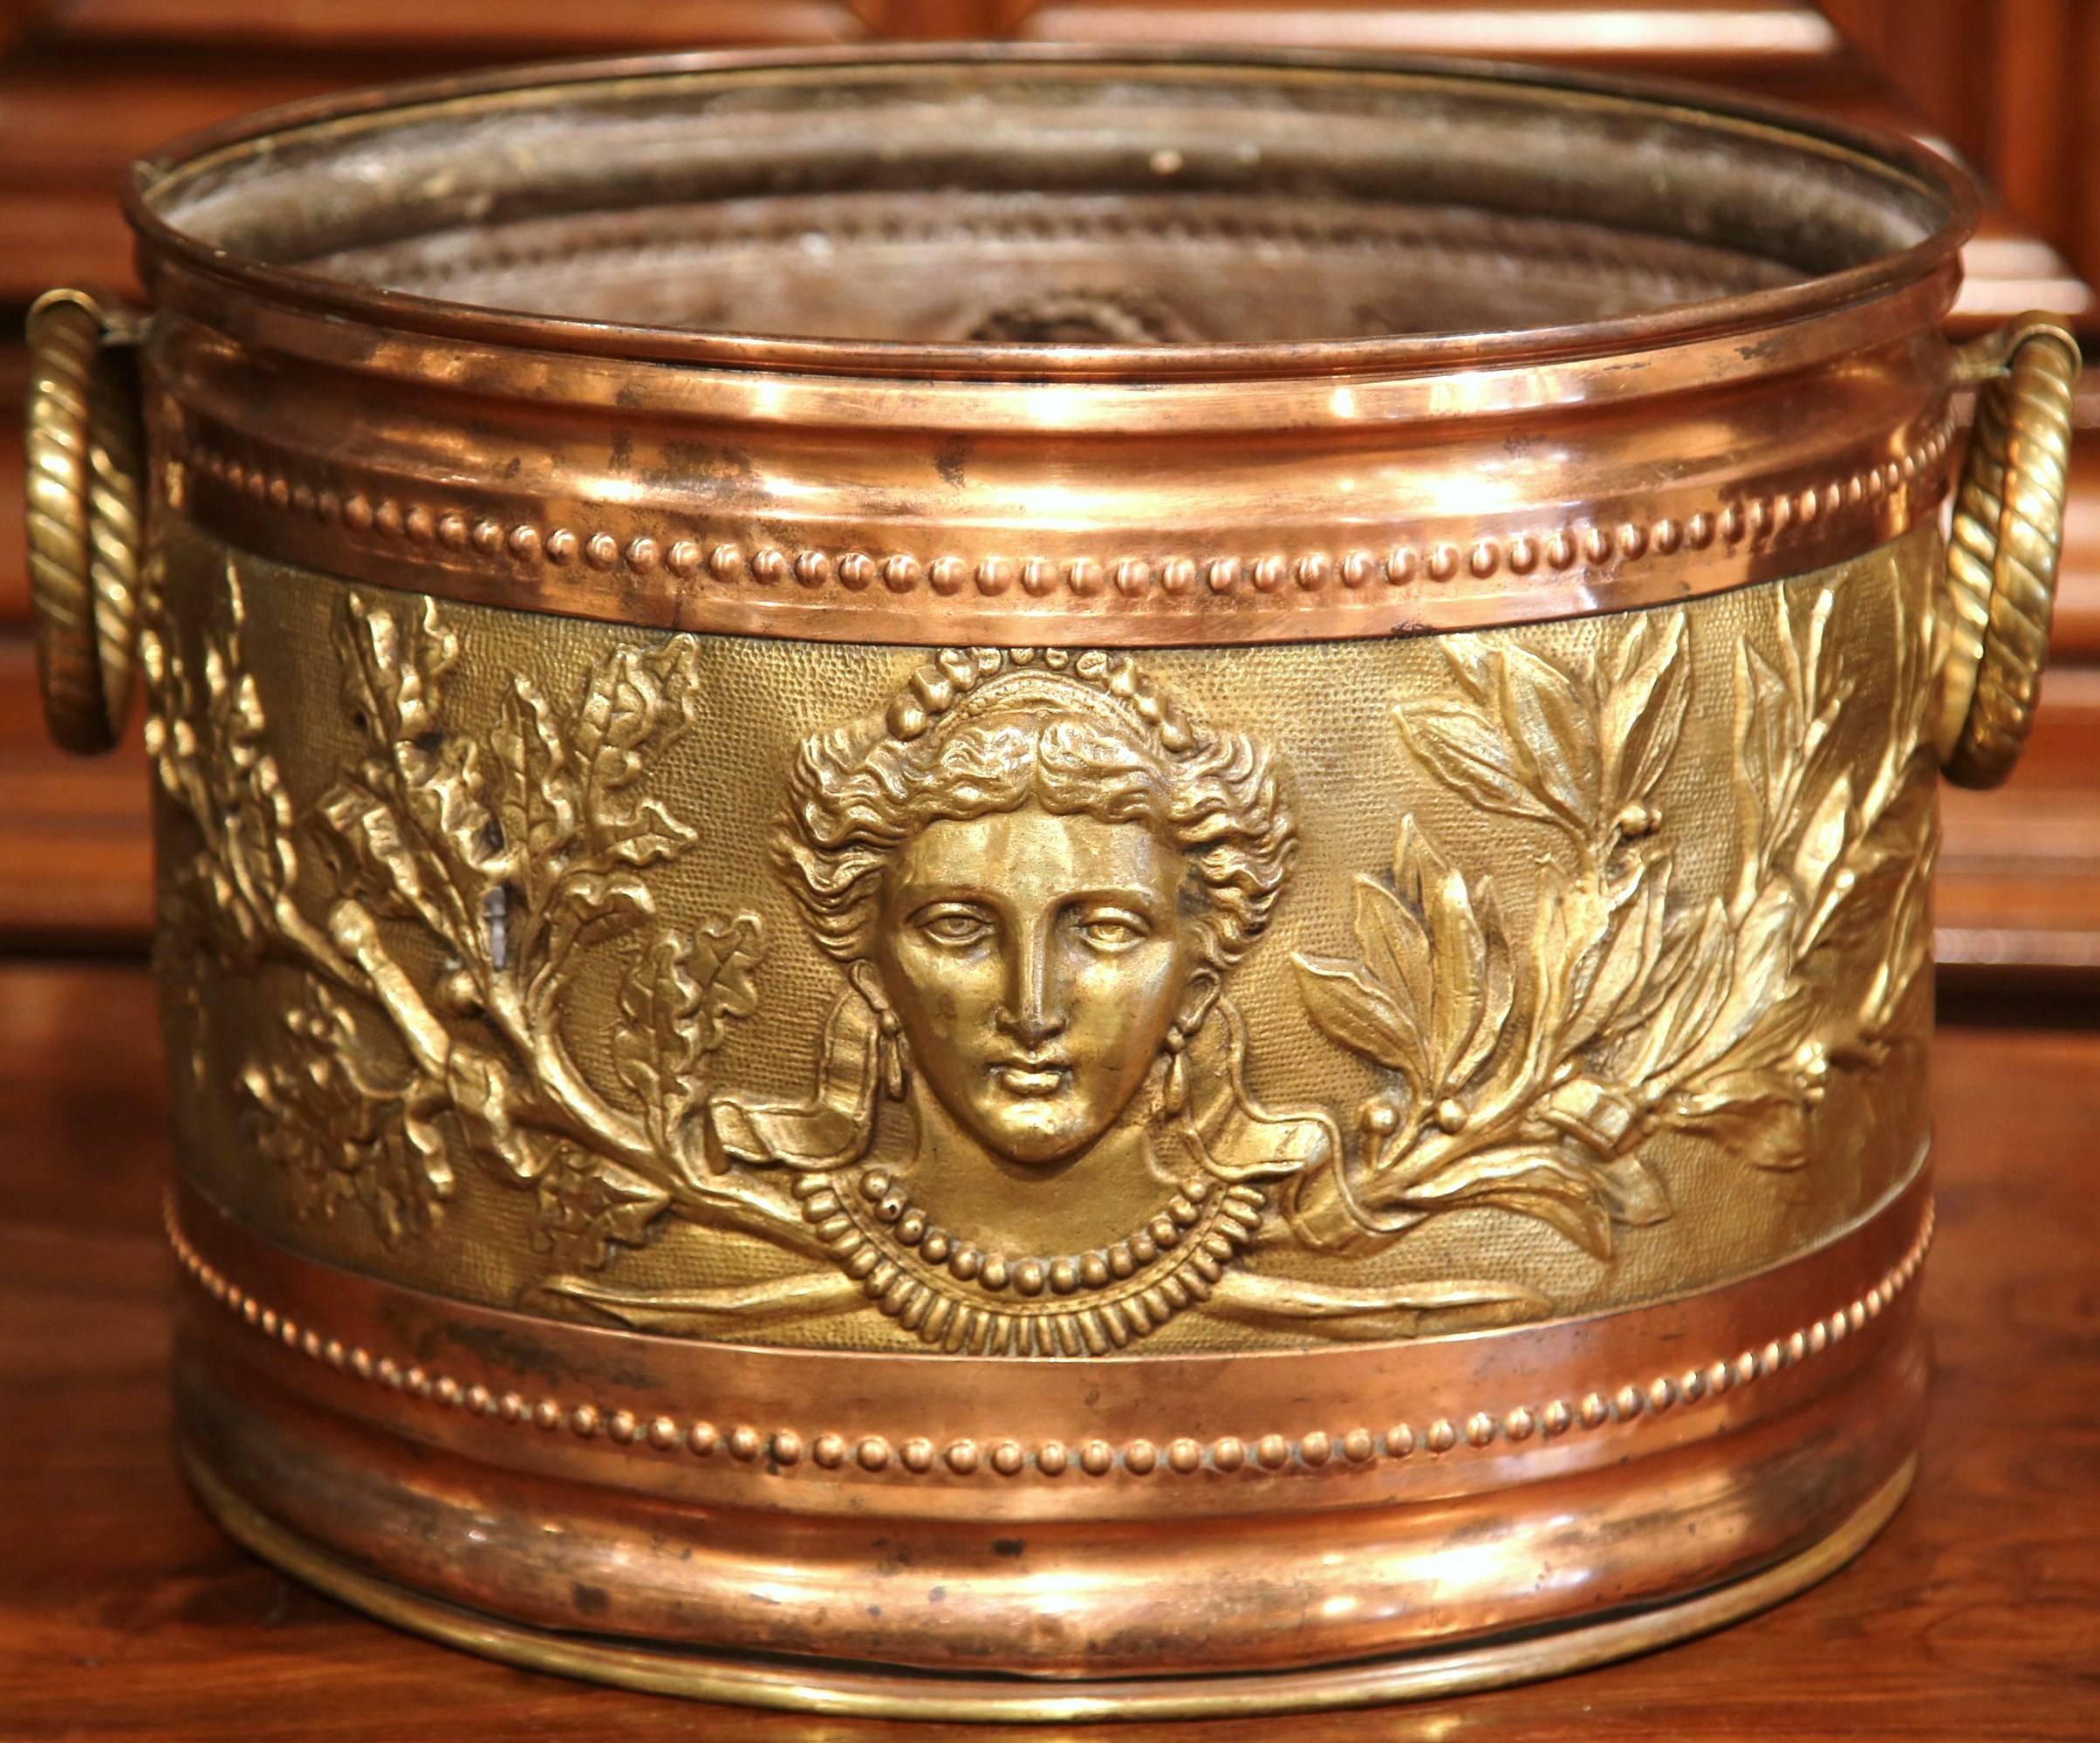 This large, antique planter was crafted in northern France, circa 1880. The round, brass and copper basket has two utilitarian rope side handles, and beautiful decorative repoussé motifs around the perimeter including detailed female faces and